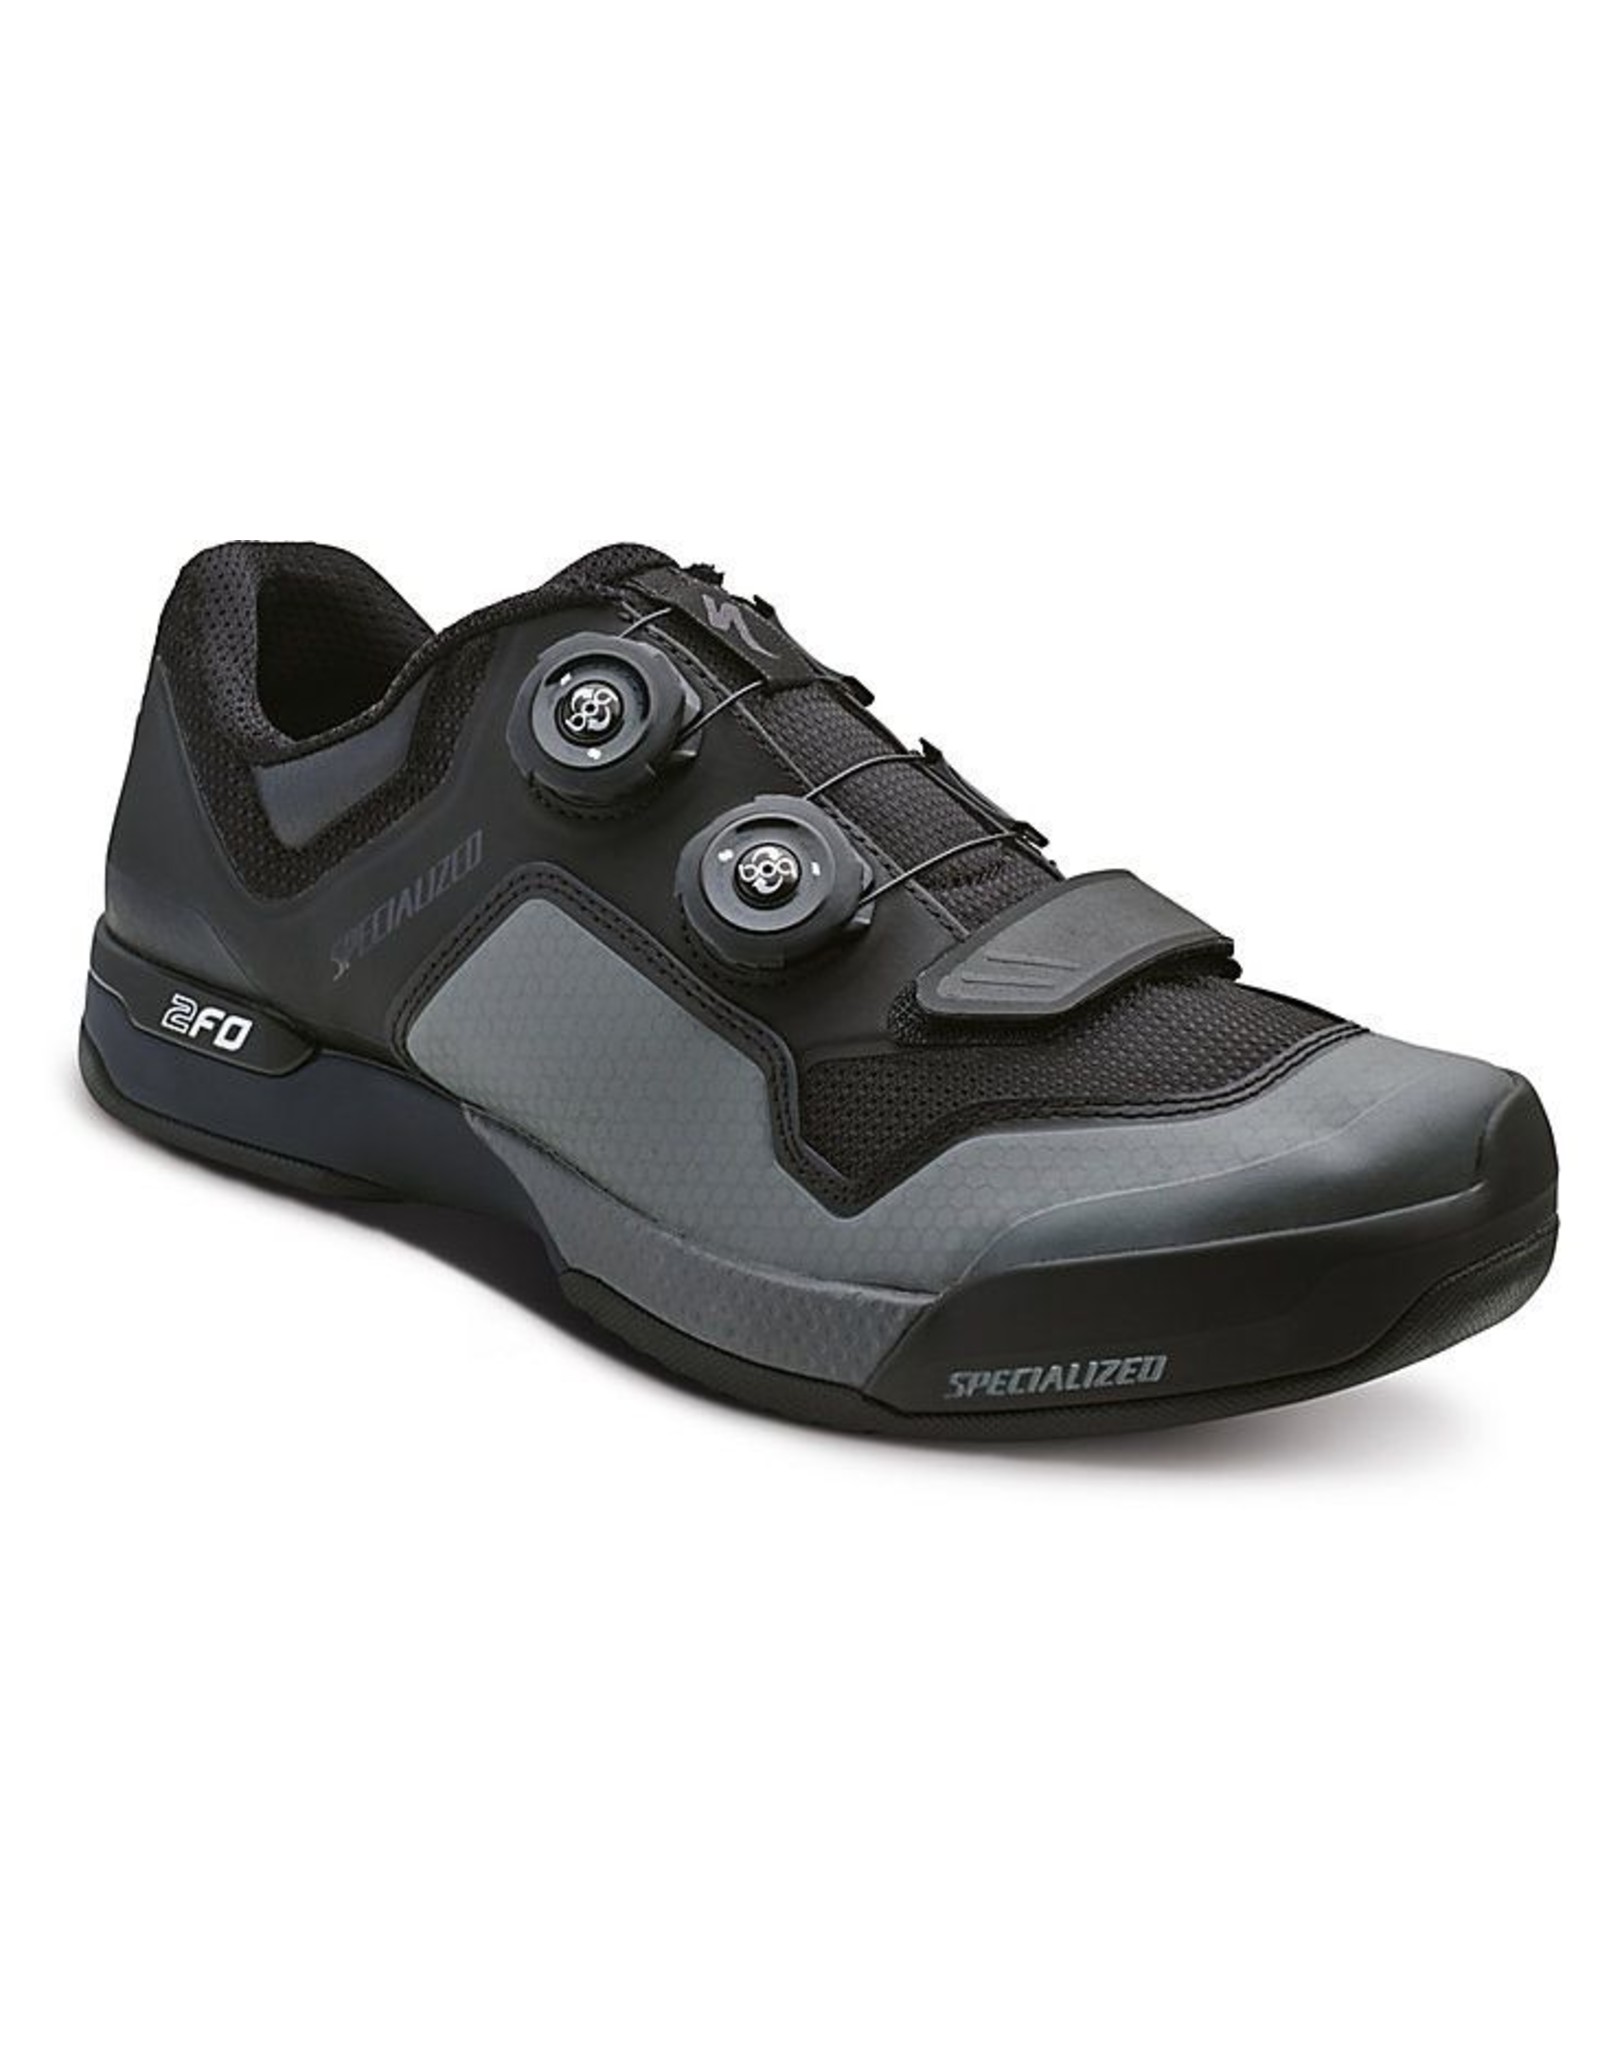 Specialized 2FO Cliplite MTB Shoe - Black/Dark Grey - 40 - Cycle Solutions